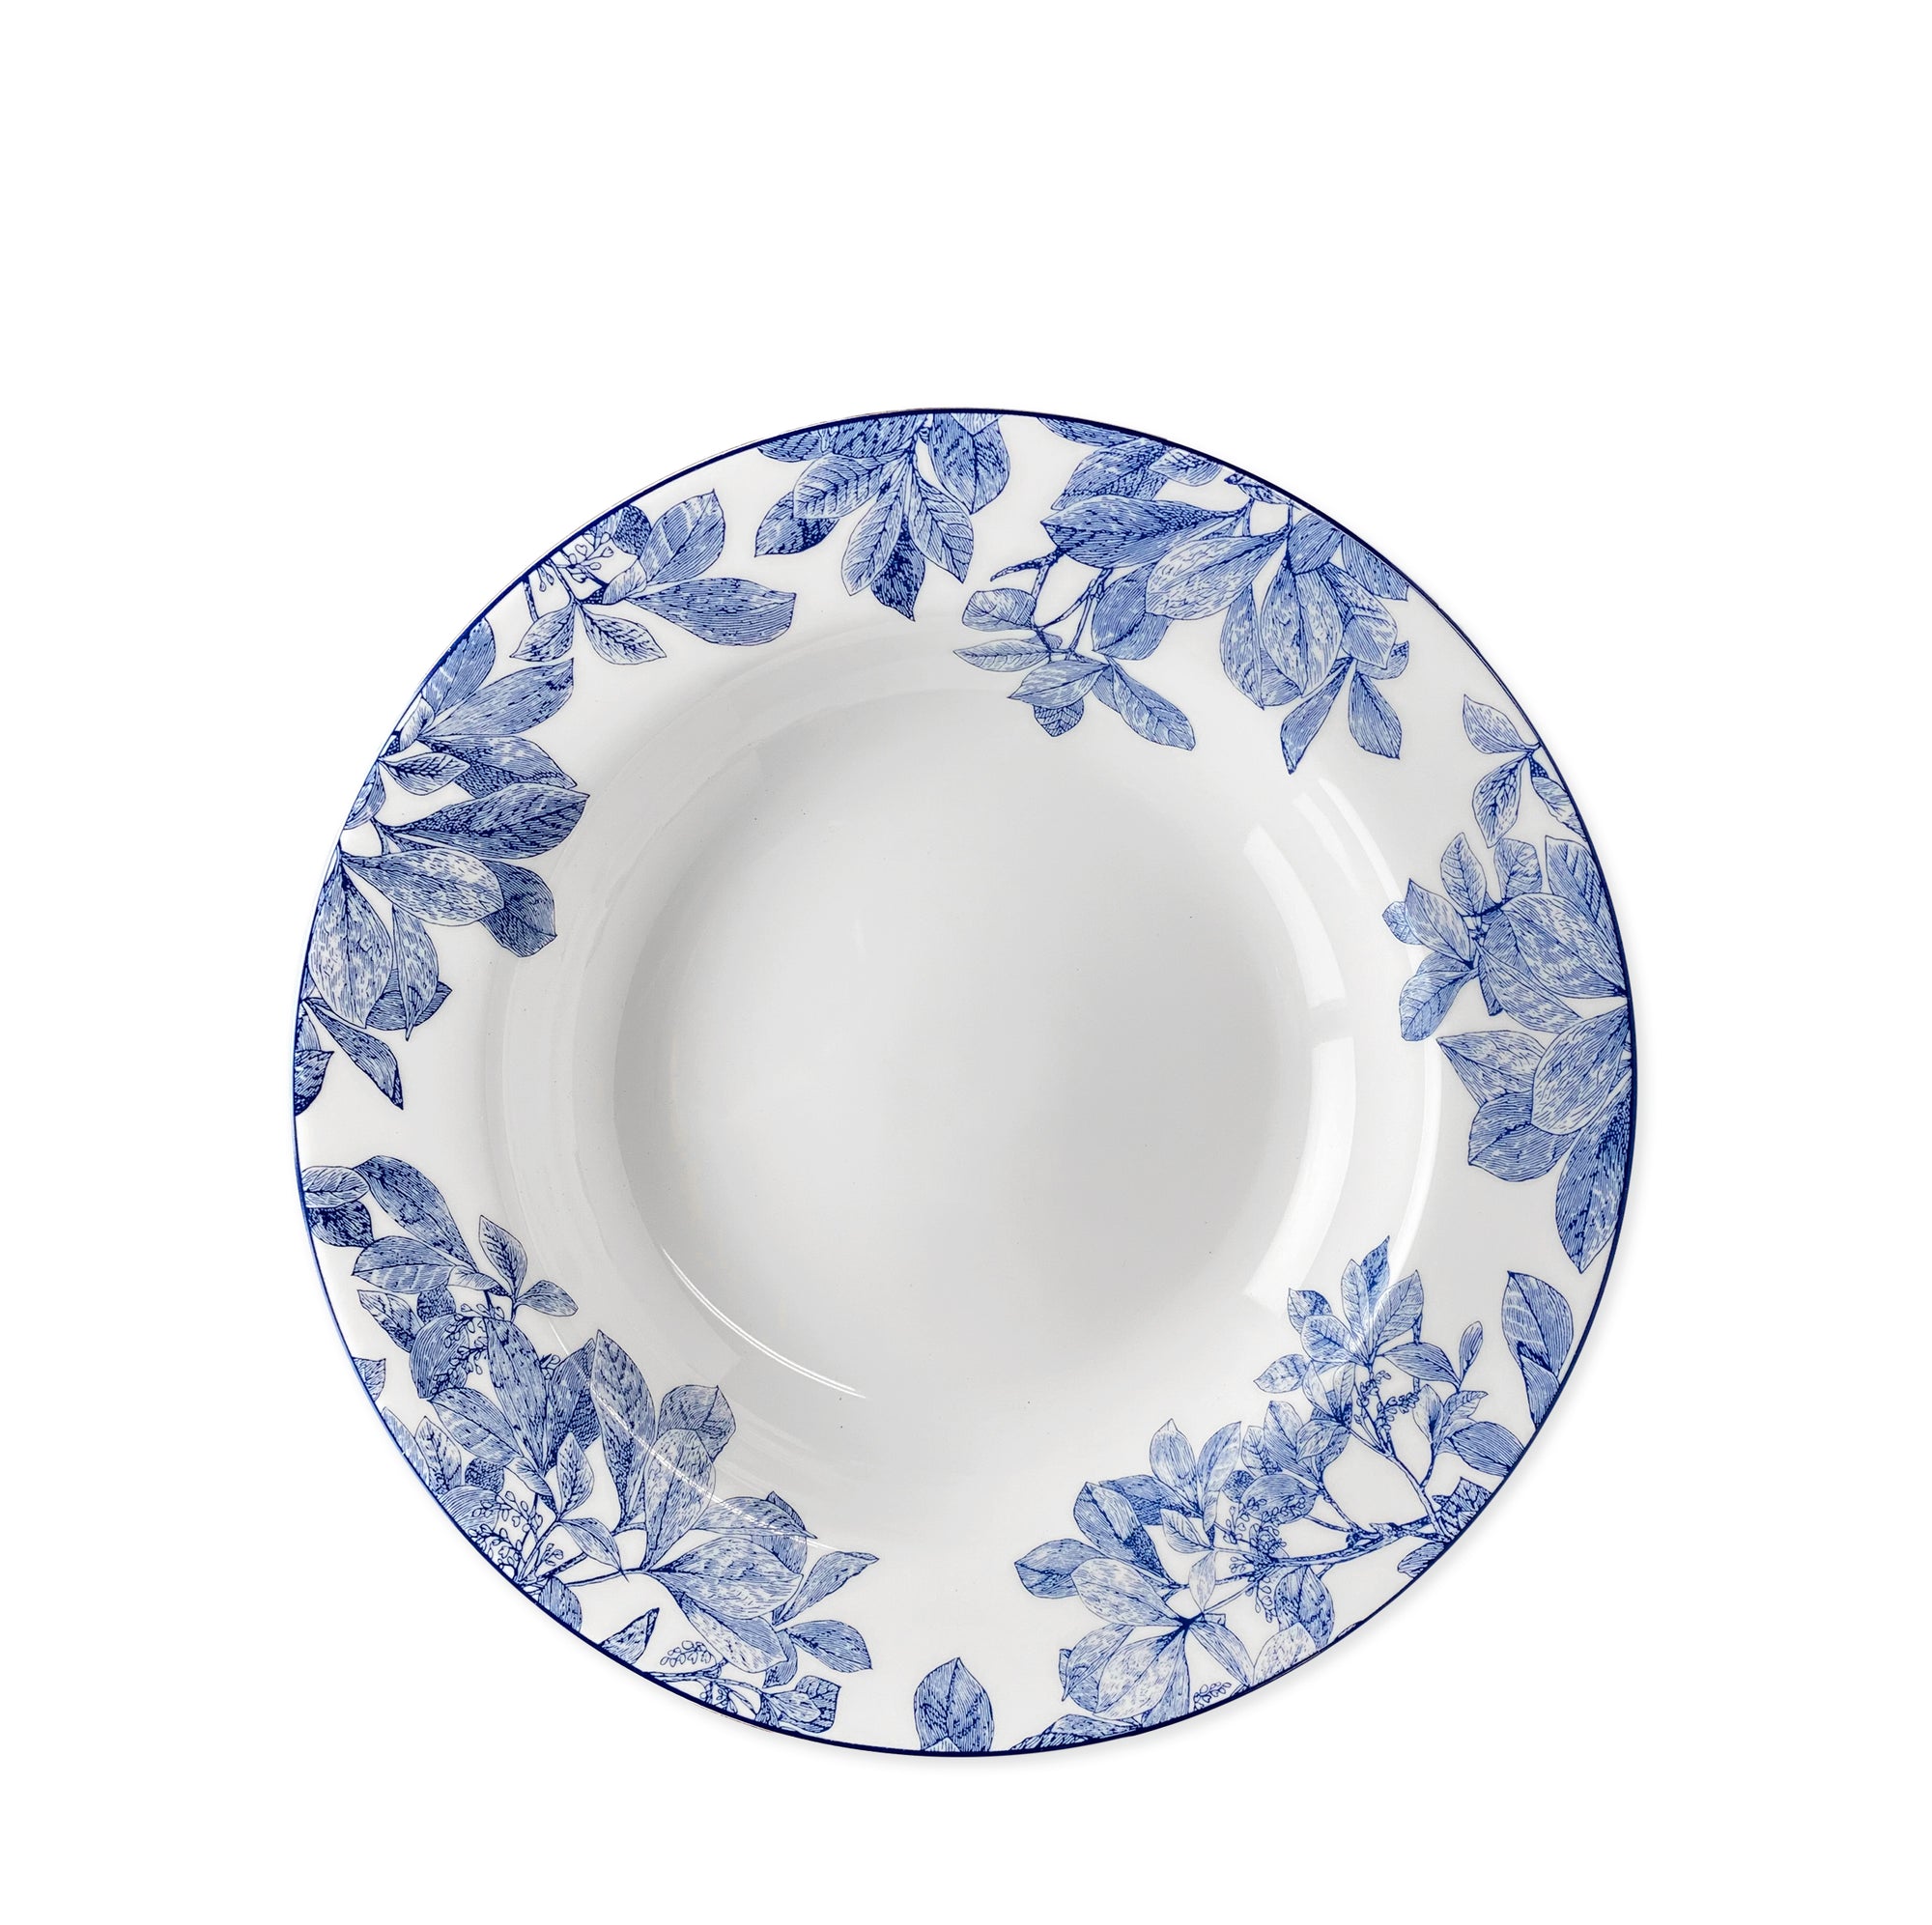 A white high-fire porcelain bowl with blue floral patterns around the rim on a white background, perfect as a classic Arbor Rimmed Soup Bowl by Caskata Artisanal Home and conveniently dishwasher safe.